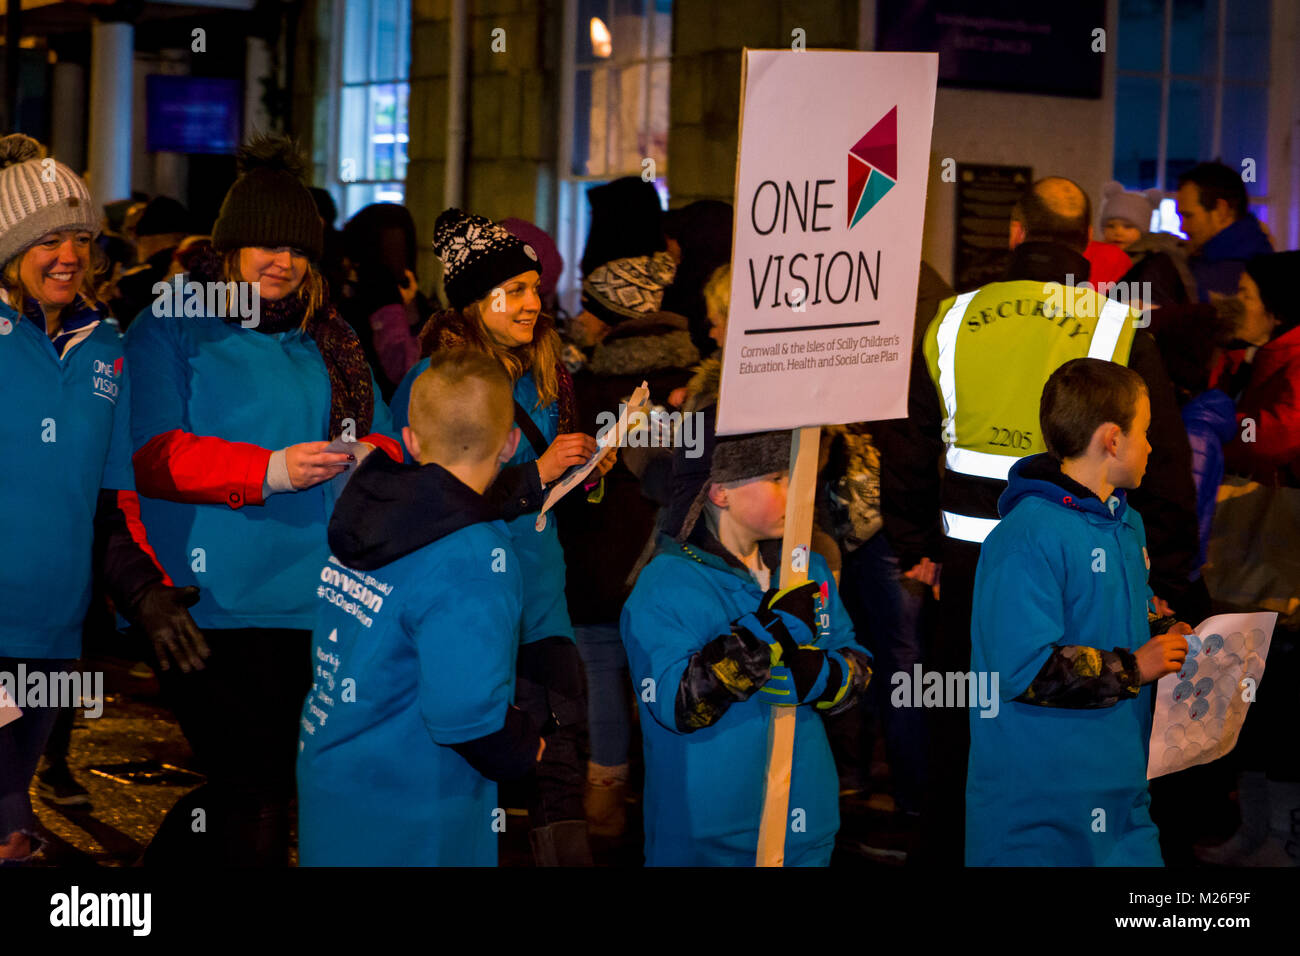 Editorial: Members of the public inc children. Truro, Cornwall, UK 01/31/2018. Truro Festival Of Lights is an annual event hailed as the start of Chri Stock Photo